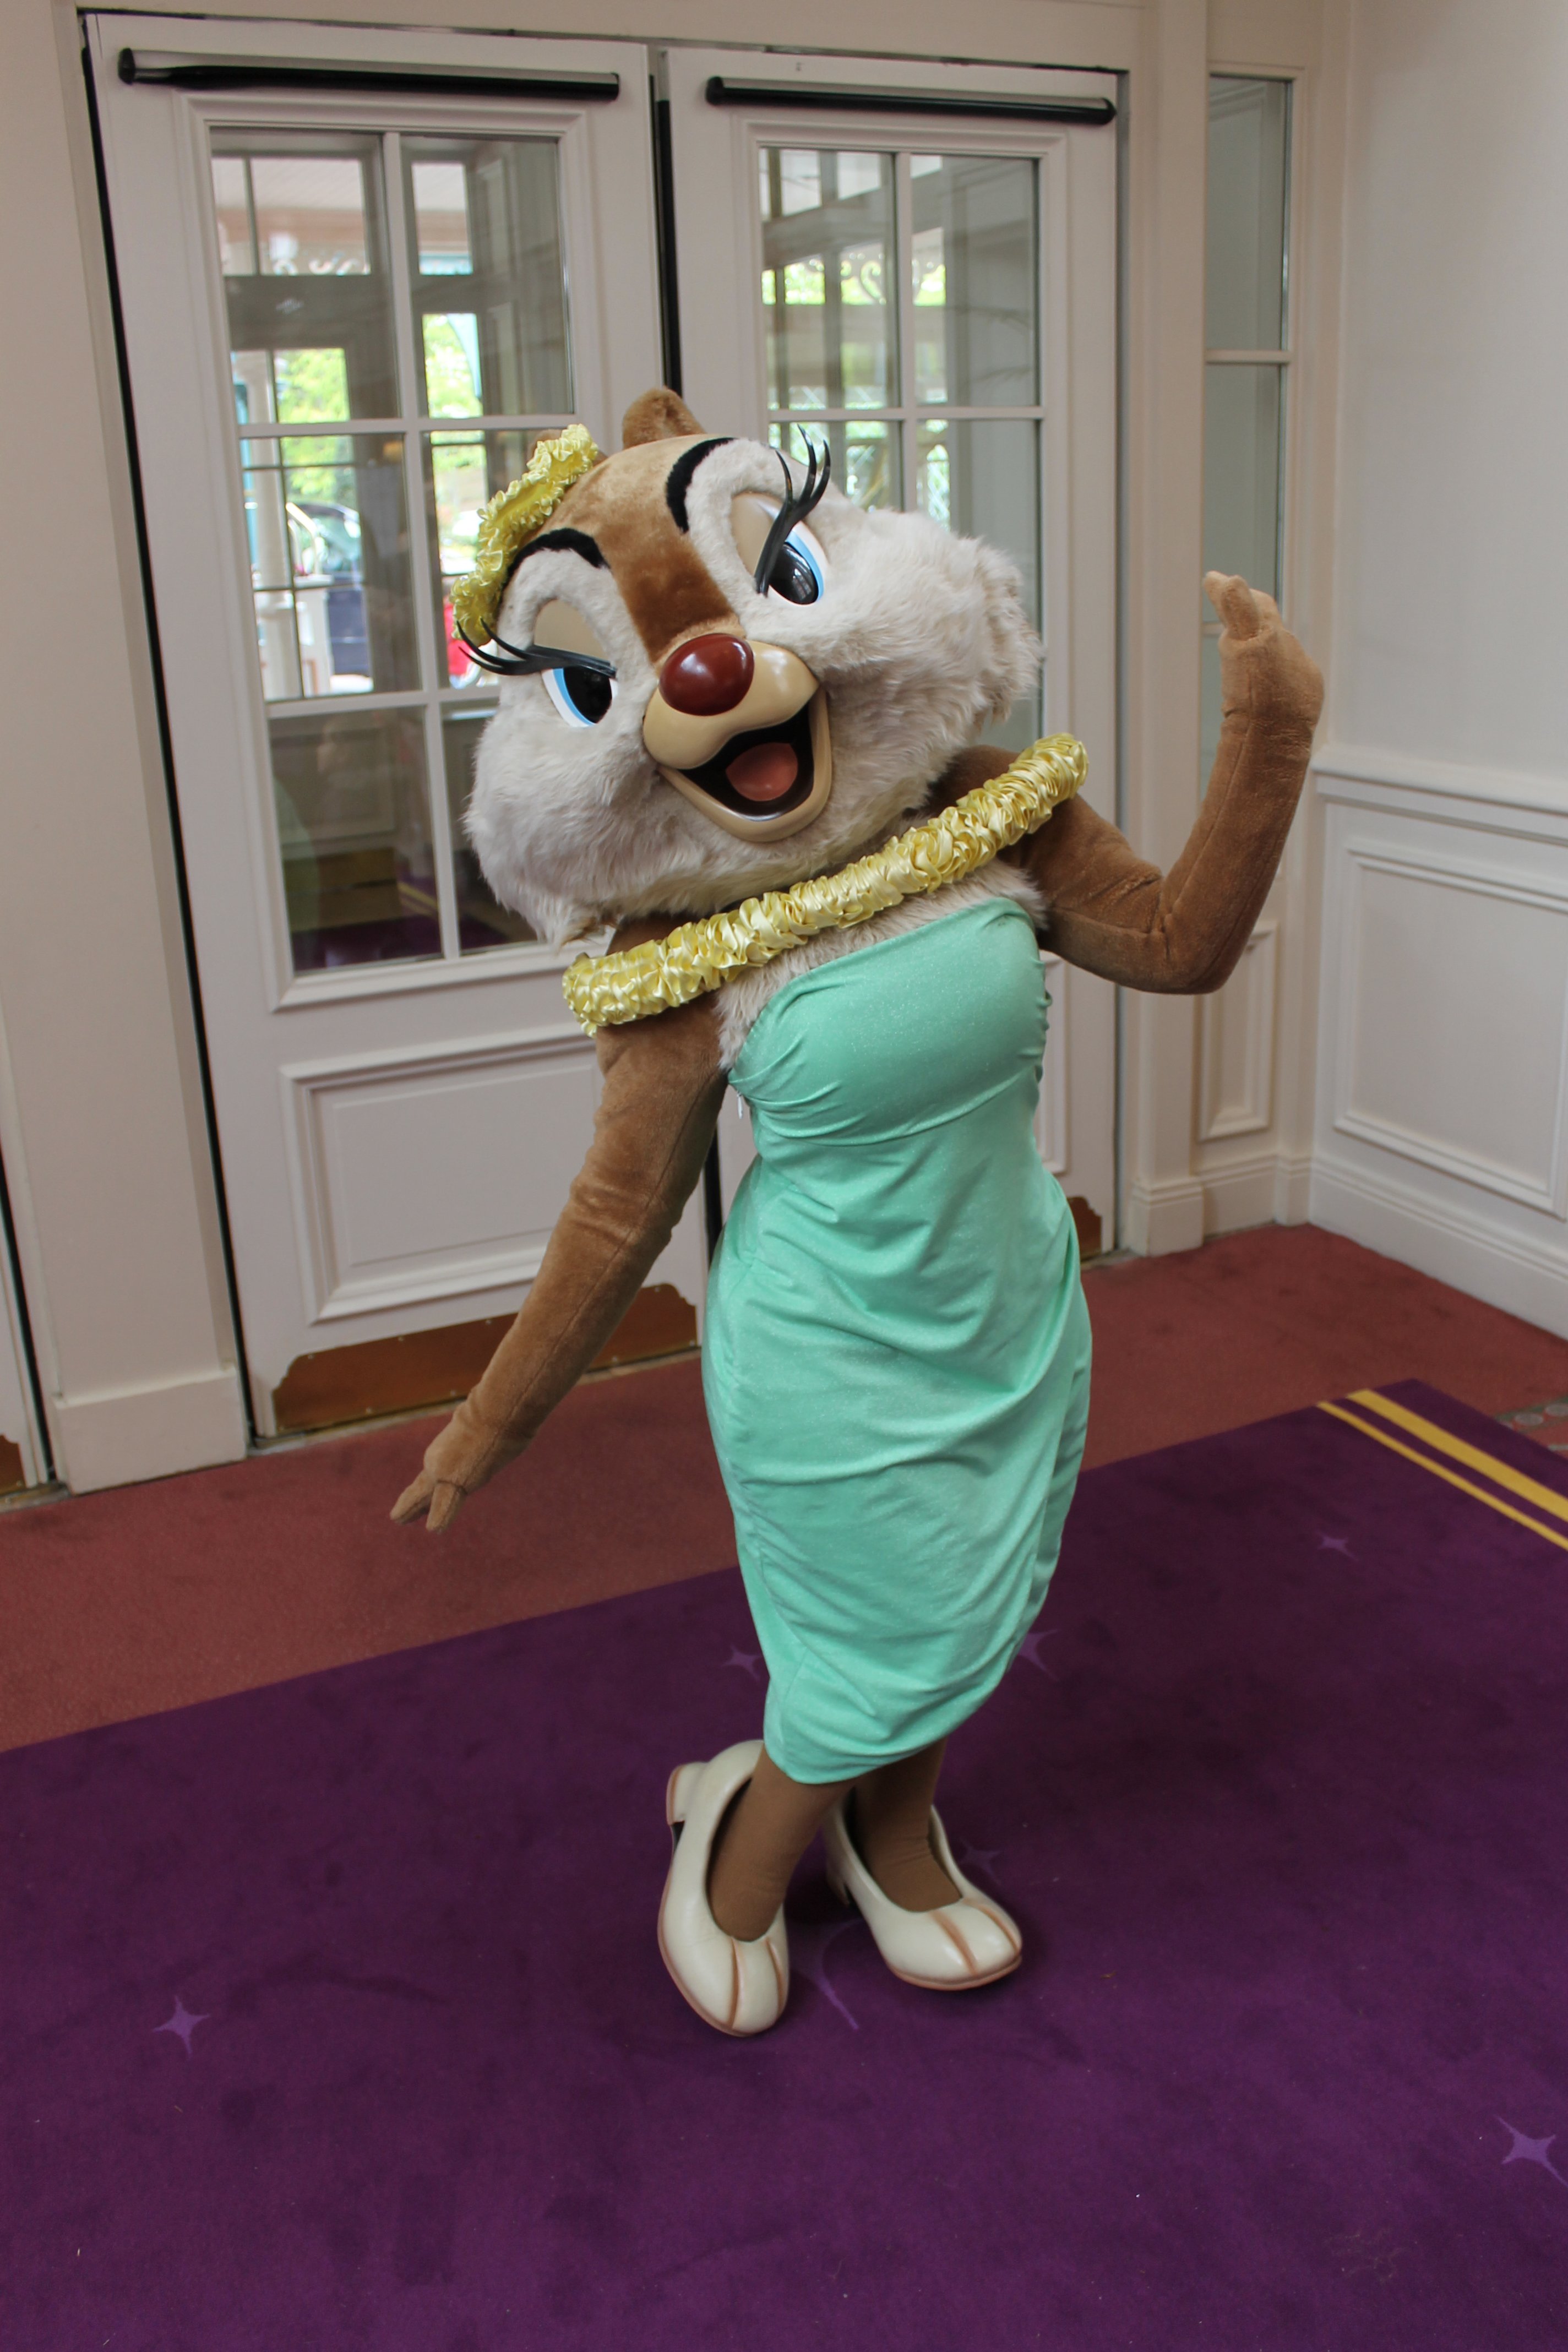 Clarice doing a set at the Disneyland Hotel, she can be found from time to time at the Parks and hotel